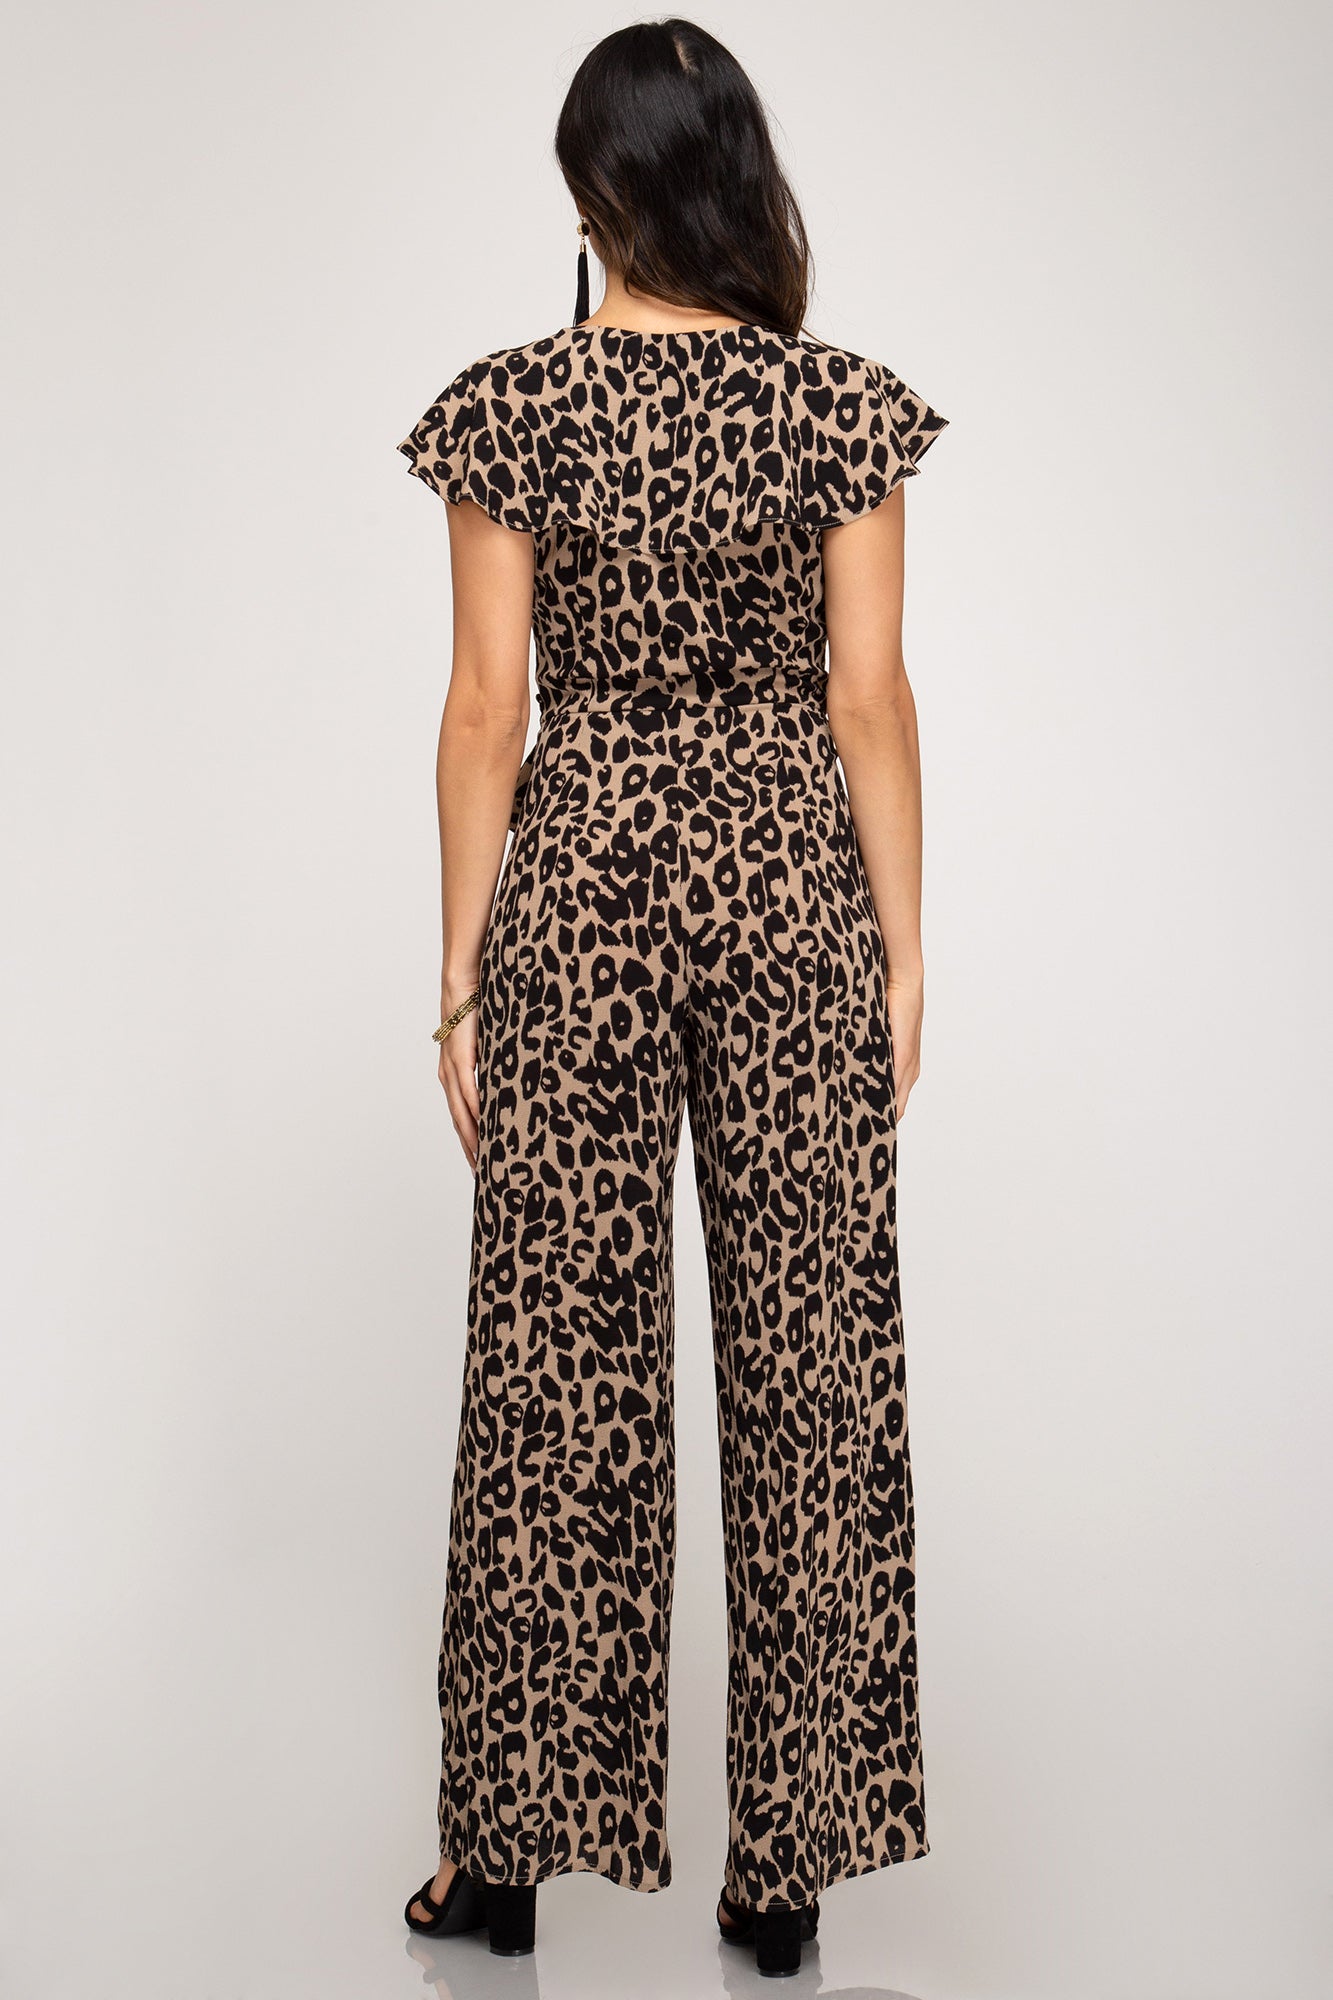 Amanda Ruffled Sleeve Leopard Print Jumpsuit - Corinne an Affordable Women's Clothing Boutique in the US USA